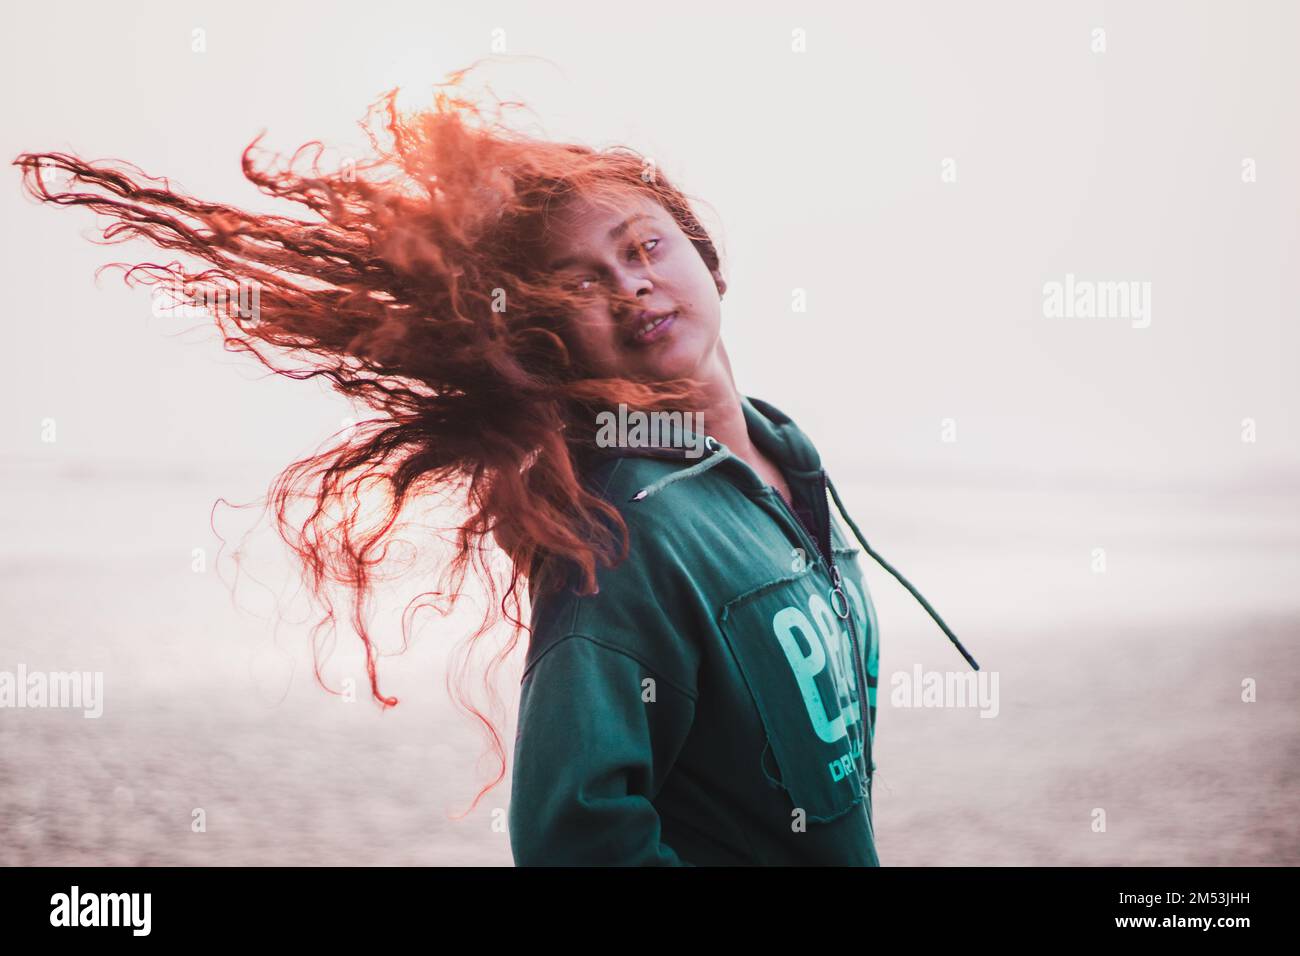 The portrait of an Indian girl playing with her orange hair Stock Photo